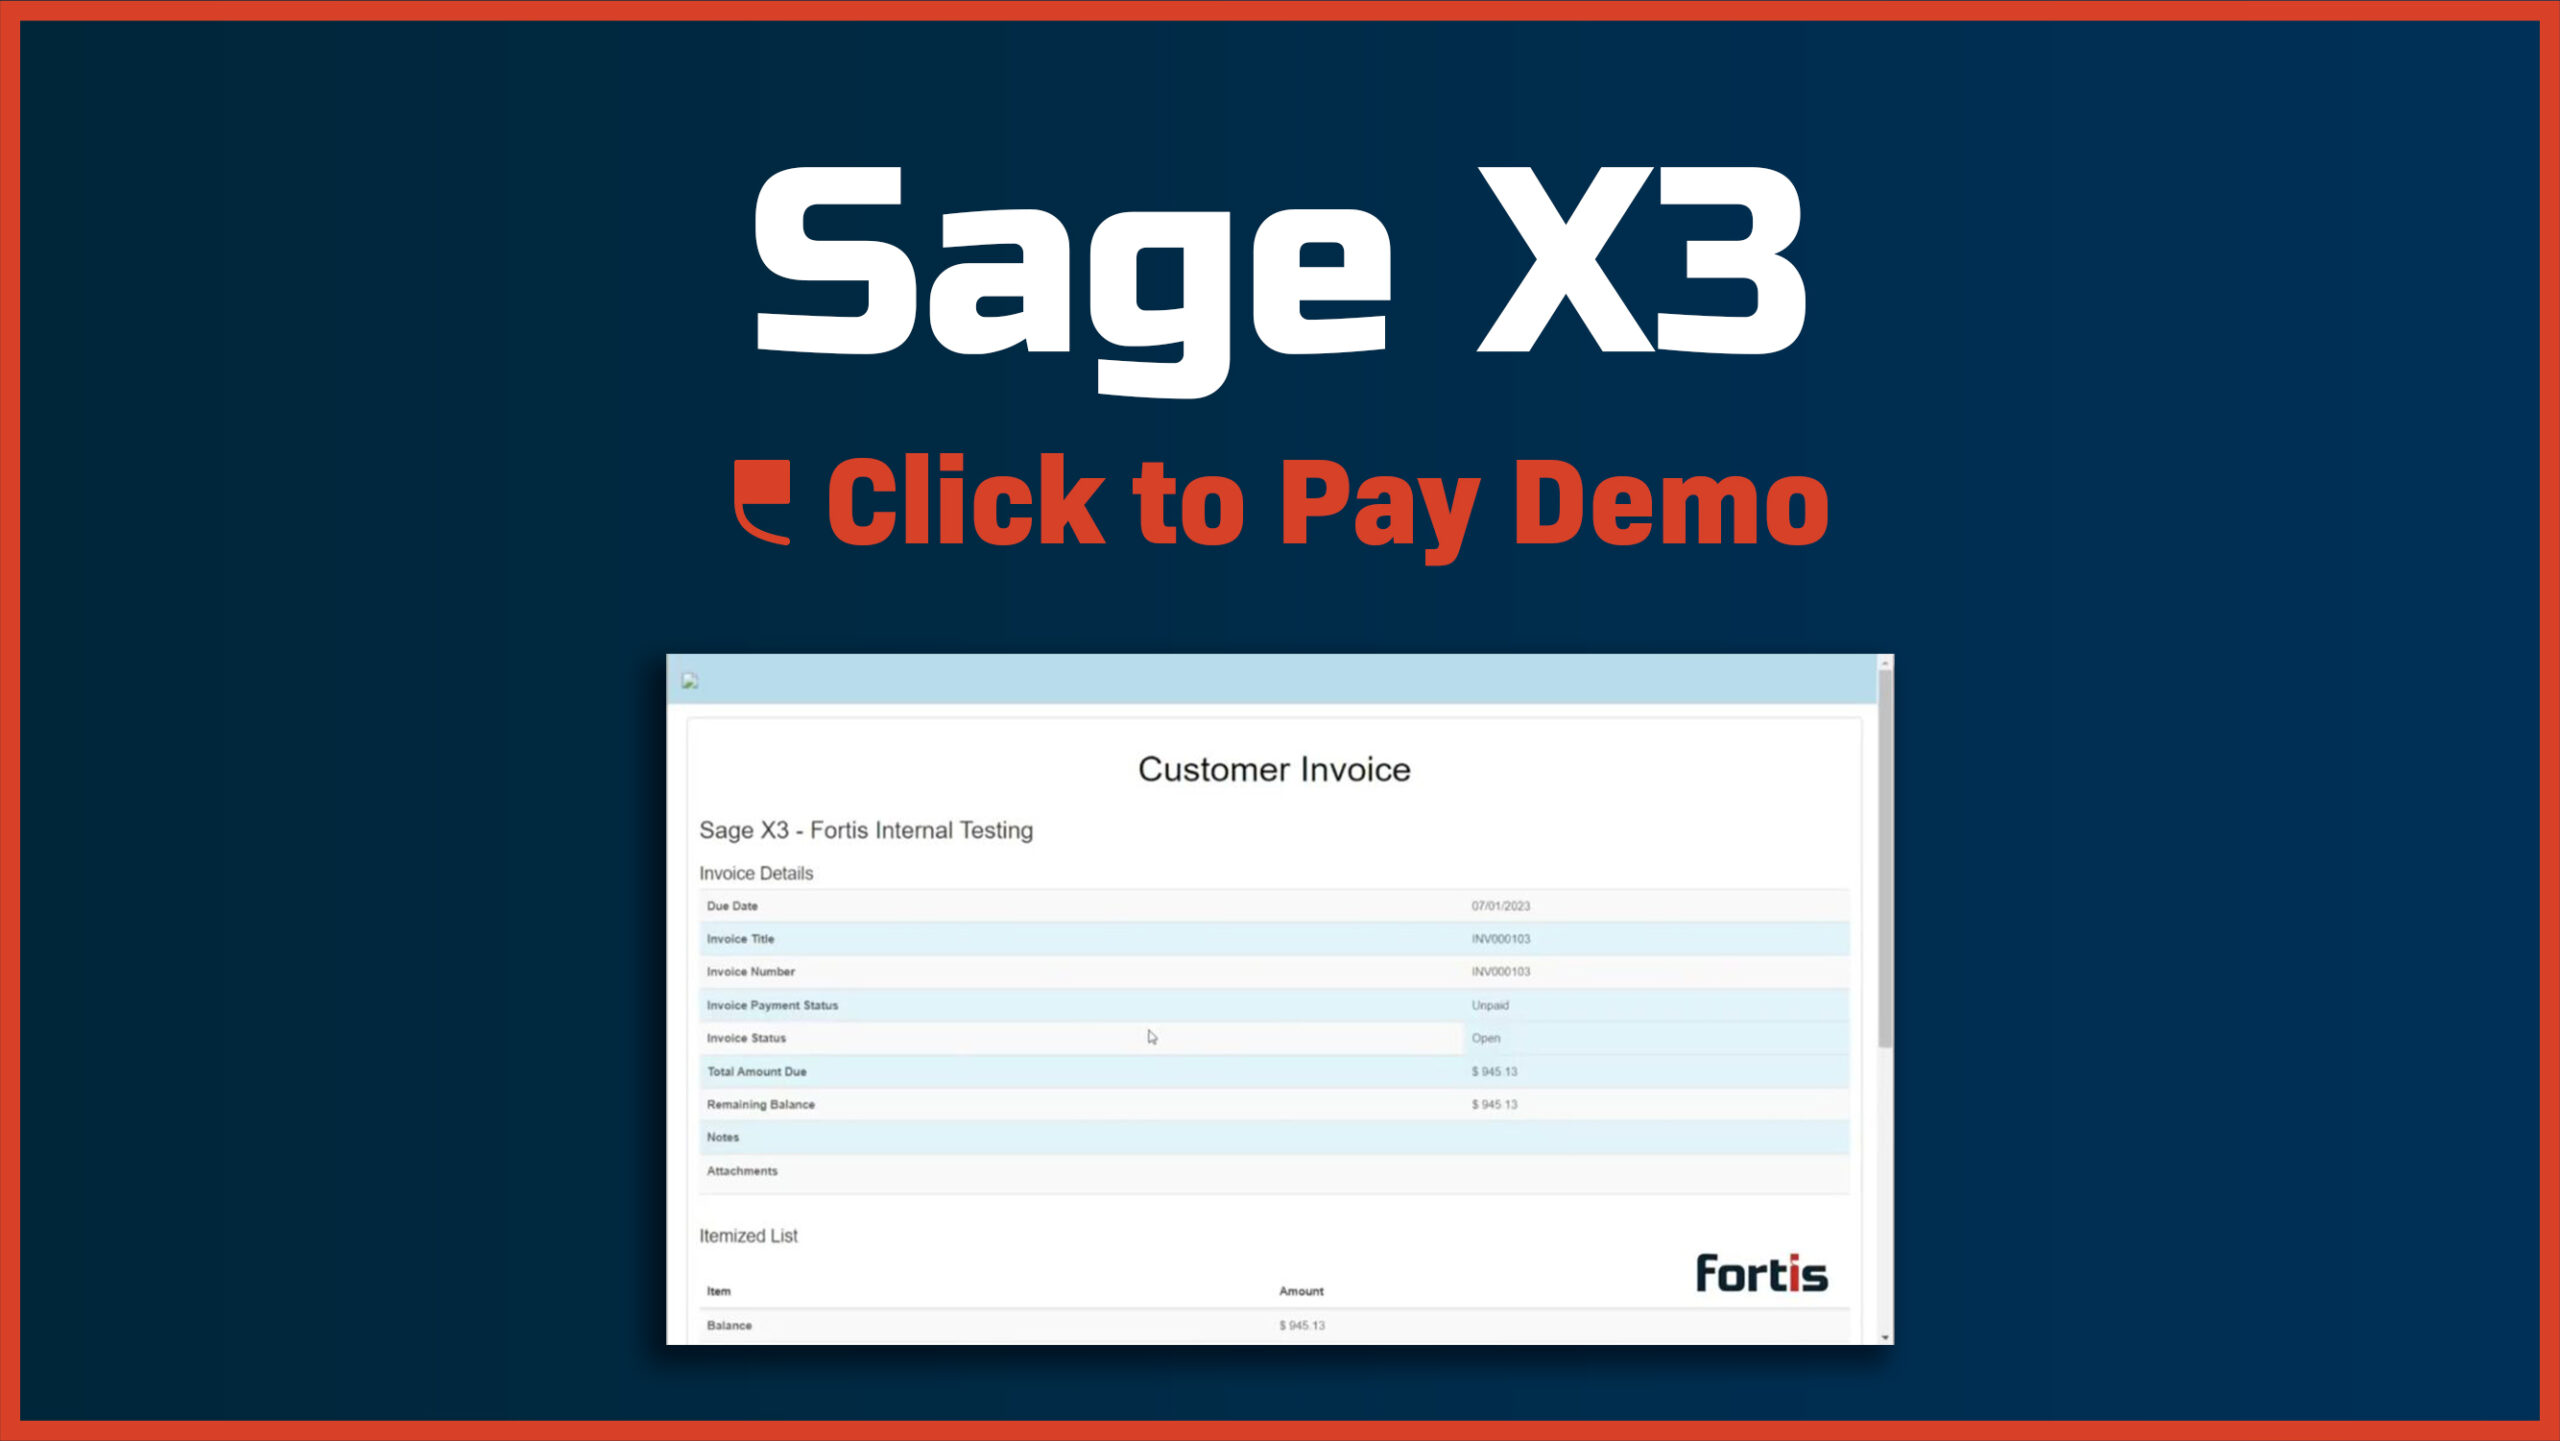 Sage X3 – Click to Pay - Featured Image